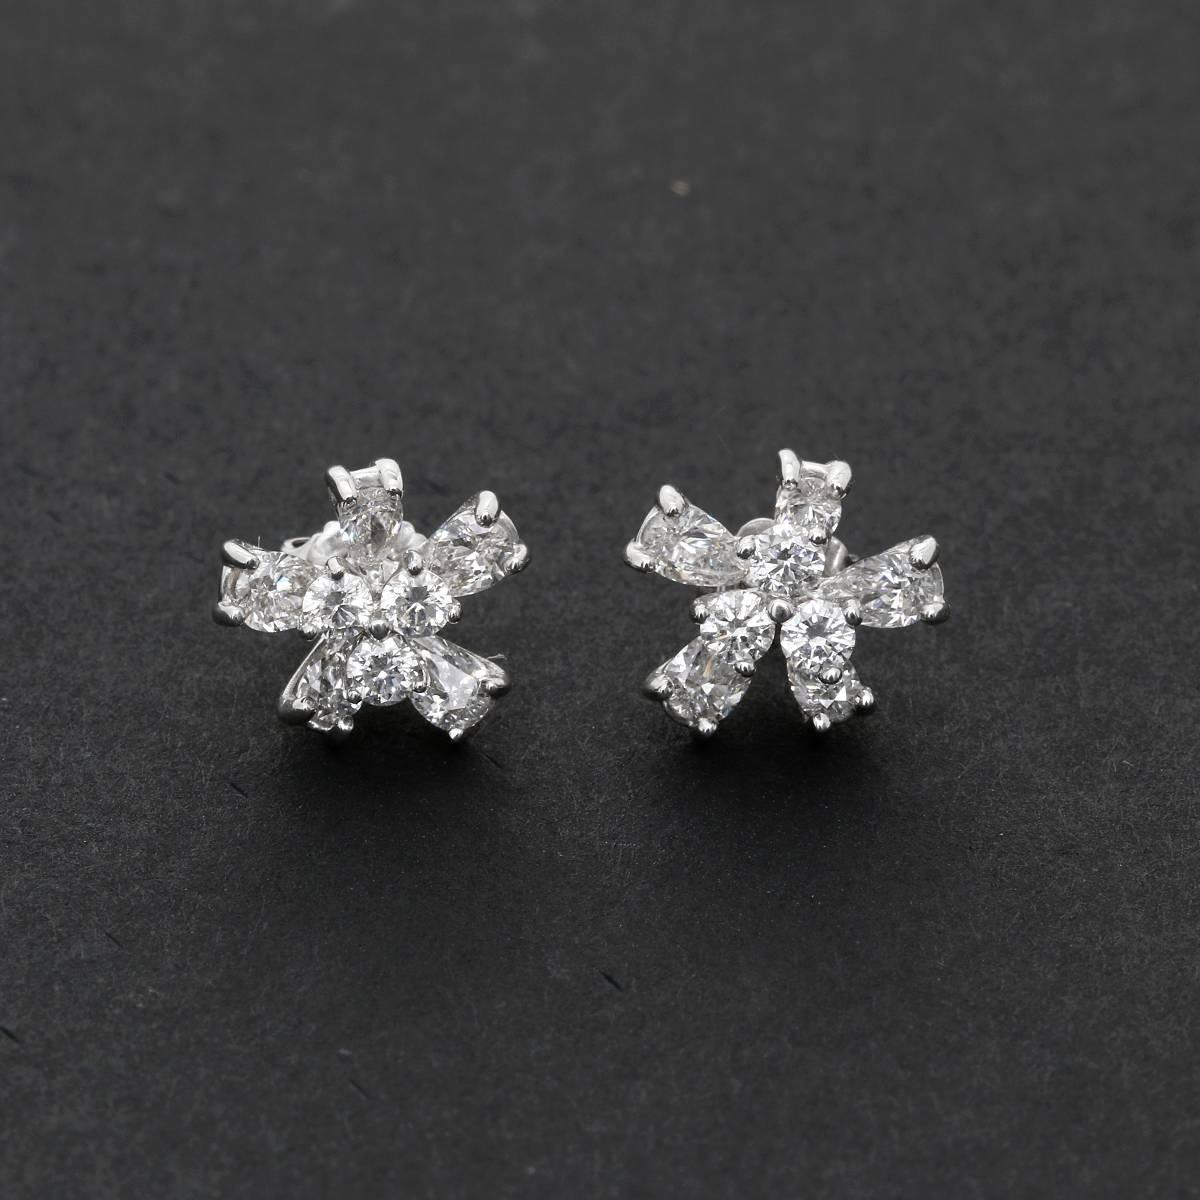 Stunning 14k White Gold and Diamond Flower Stud Earrings - . These stunning earrings feature 1.5 carats of diamonds (SI1-SI2 clarity, G color) set in 14k white gold.  Earrings measure apx, 12 mm  in length with jacket. Total weight is 4.5 grams. 